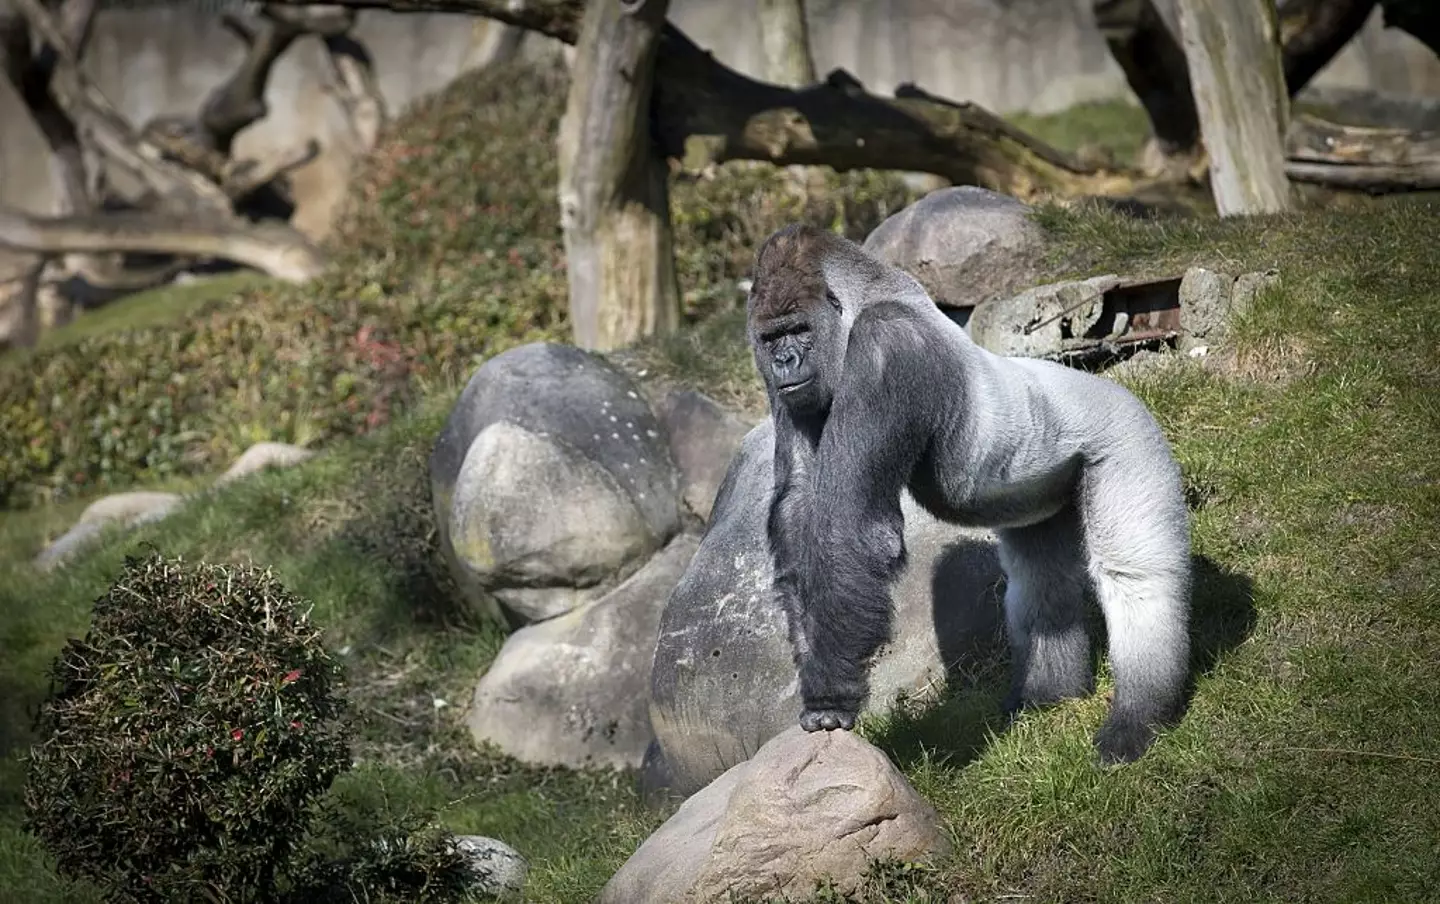 Bokito escaped from his enclosure in 2007. (JERRY LAMPEN/AFP via Getty Images)